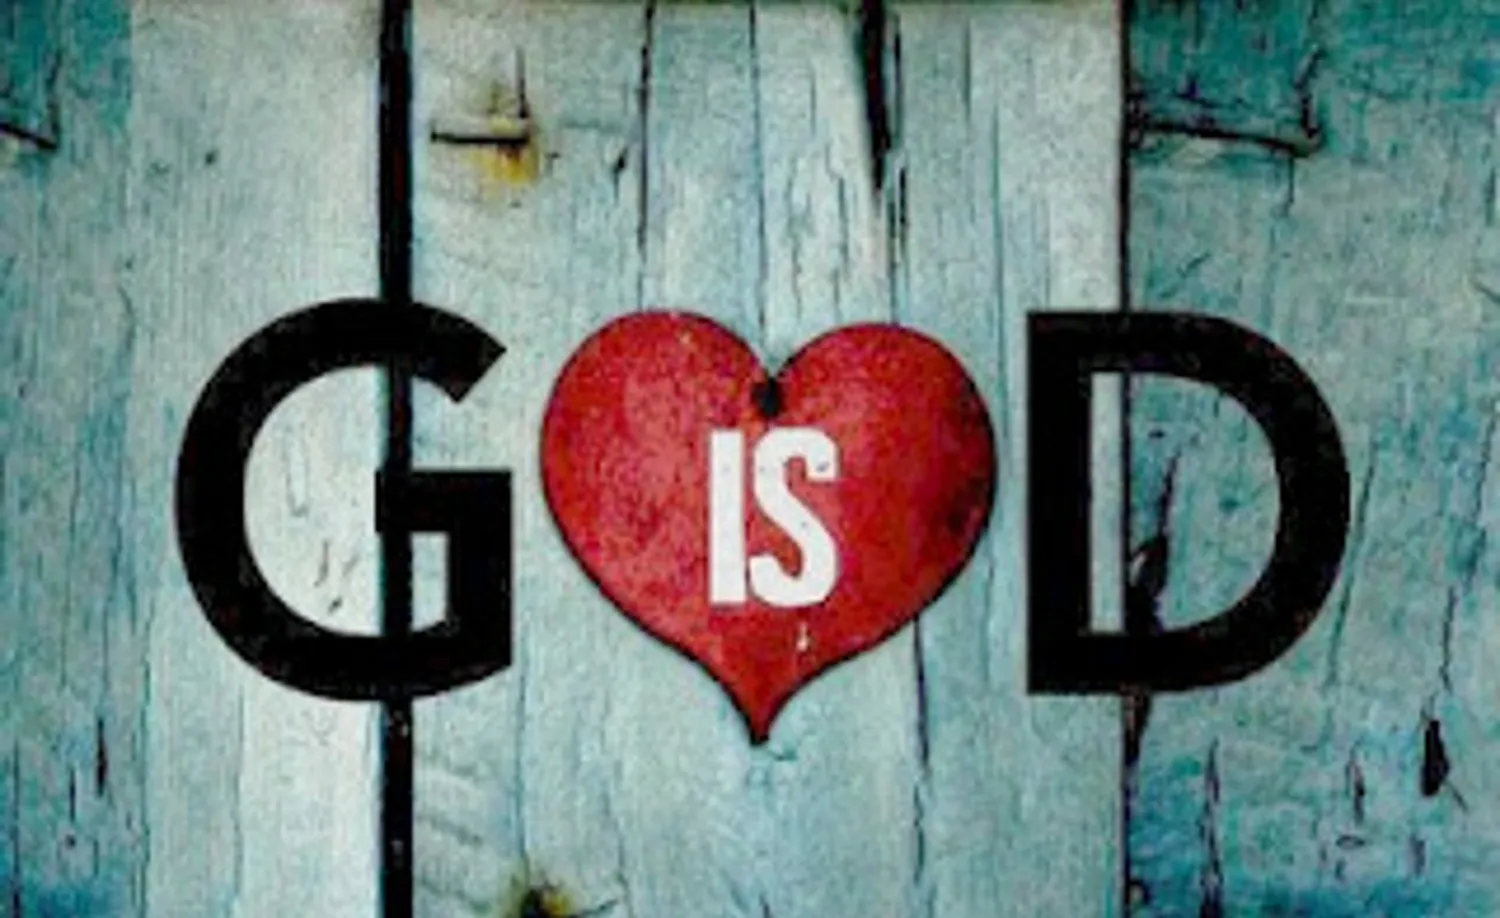 what’s god’s love